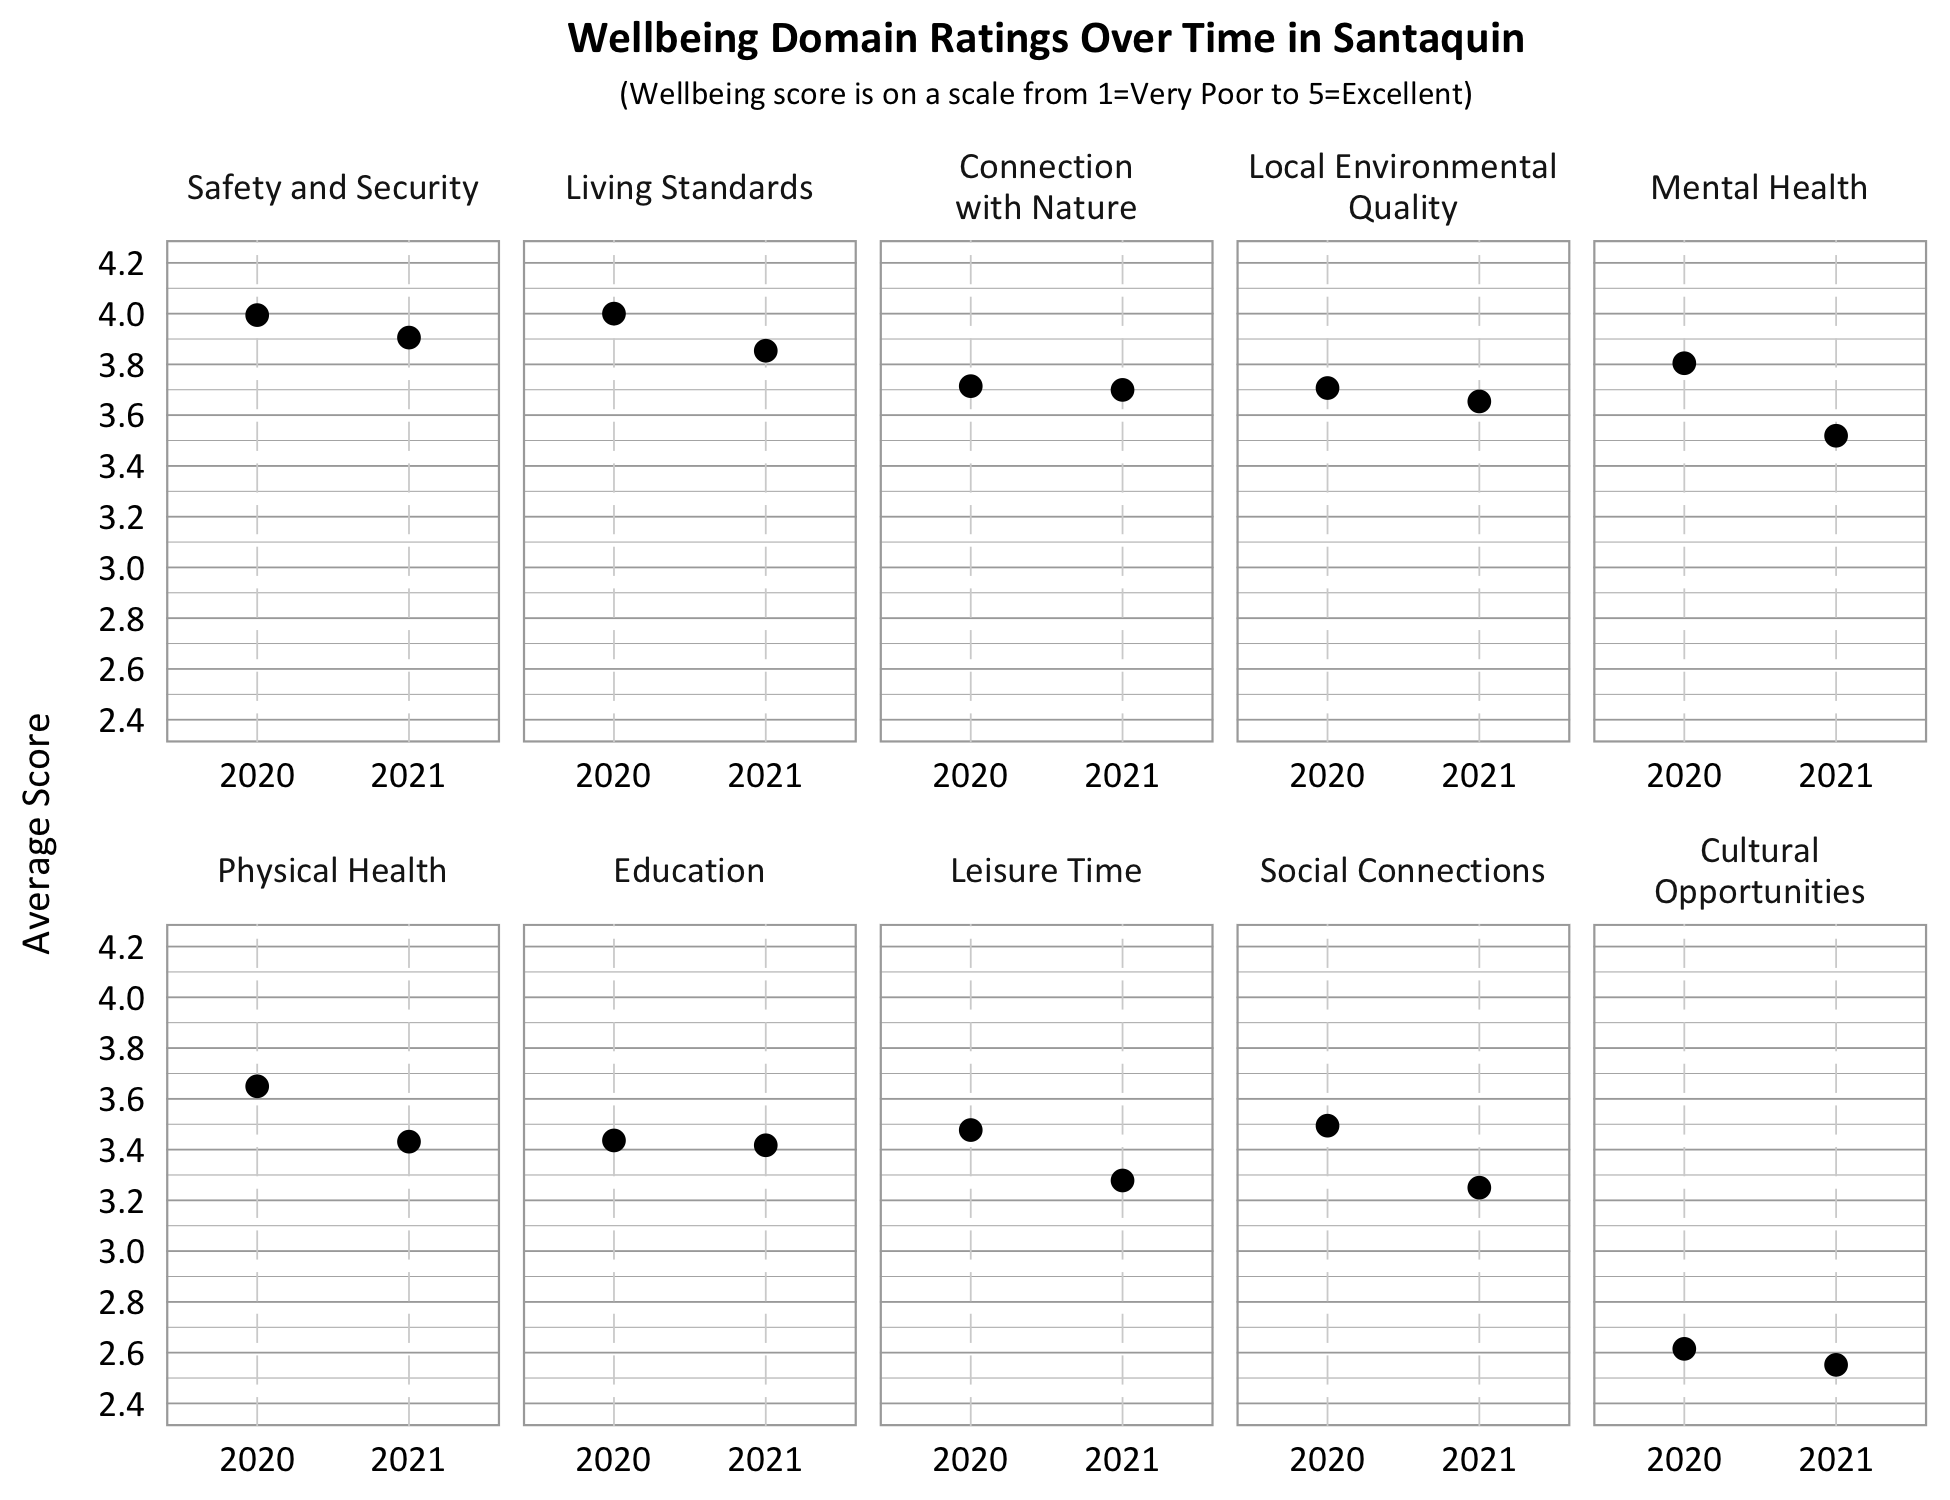 Dot Plot. Title: Wellbeing Domain Overtime in Santaquin, Subtitle: Wellbeing score is on a scale from 1=Very Poor to 5=Excellent. Category: Living Standards 2020- 4.0, 2021- 3.65; Category: Safety and security- 2020- 4.0, 2021- 3.9; Category: Connection with Nature- 2020- 3.7, 2021- 3.7, Category: Education- 2020- 3.45, 2021- 3.45; Category: Physical Health 2020- 3.65, 2021 3.45; Category: Mental Health- 2020- 3.8, 2021- 3.5; Category: Local Environmental Quality- 2020- 3.7, 2021- 3.65; Category: Leisure Time- 2020- 3.55, 2021- 3.3, Category: Social Connection- 2020- 3.5; 2021- 3.25, Category: Cultural Opportunities- 2020- 2.6 , 2021- 2.55. 